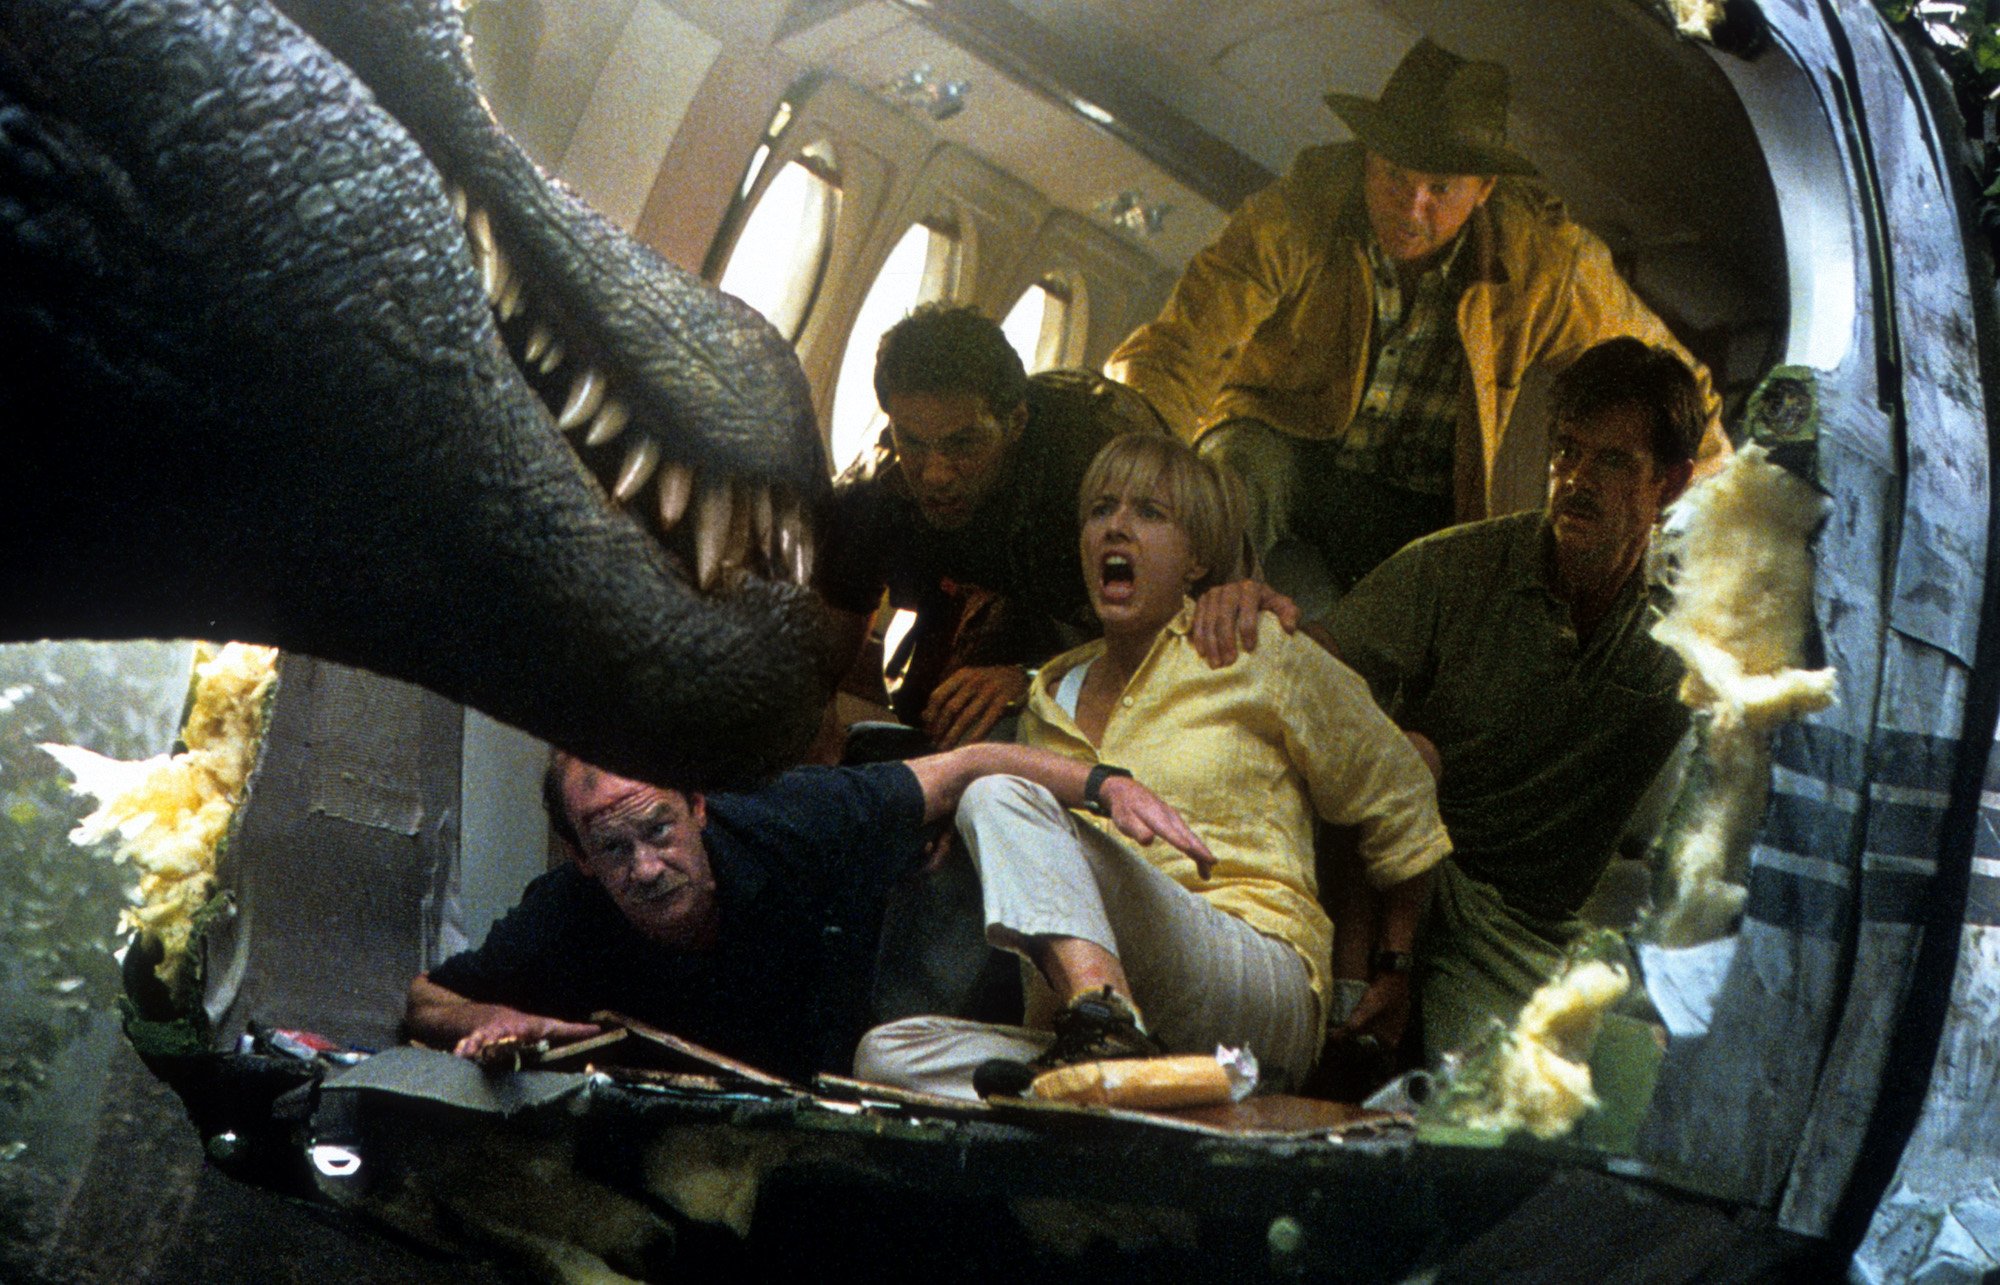 A scene from the film 'Jurassic Park III'